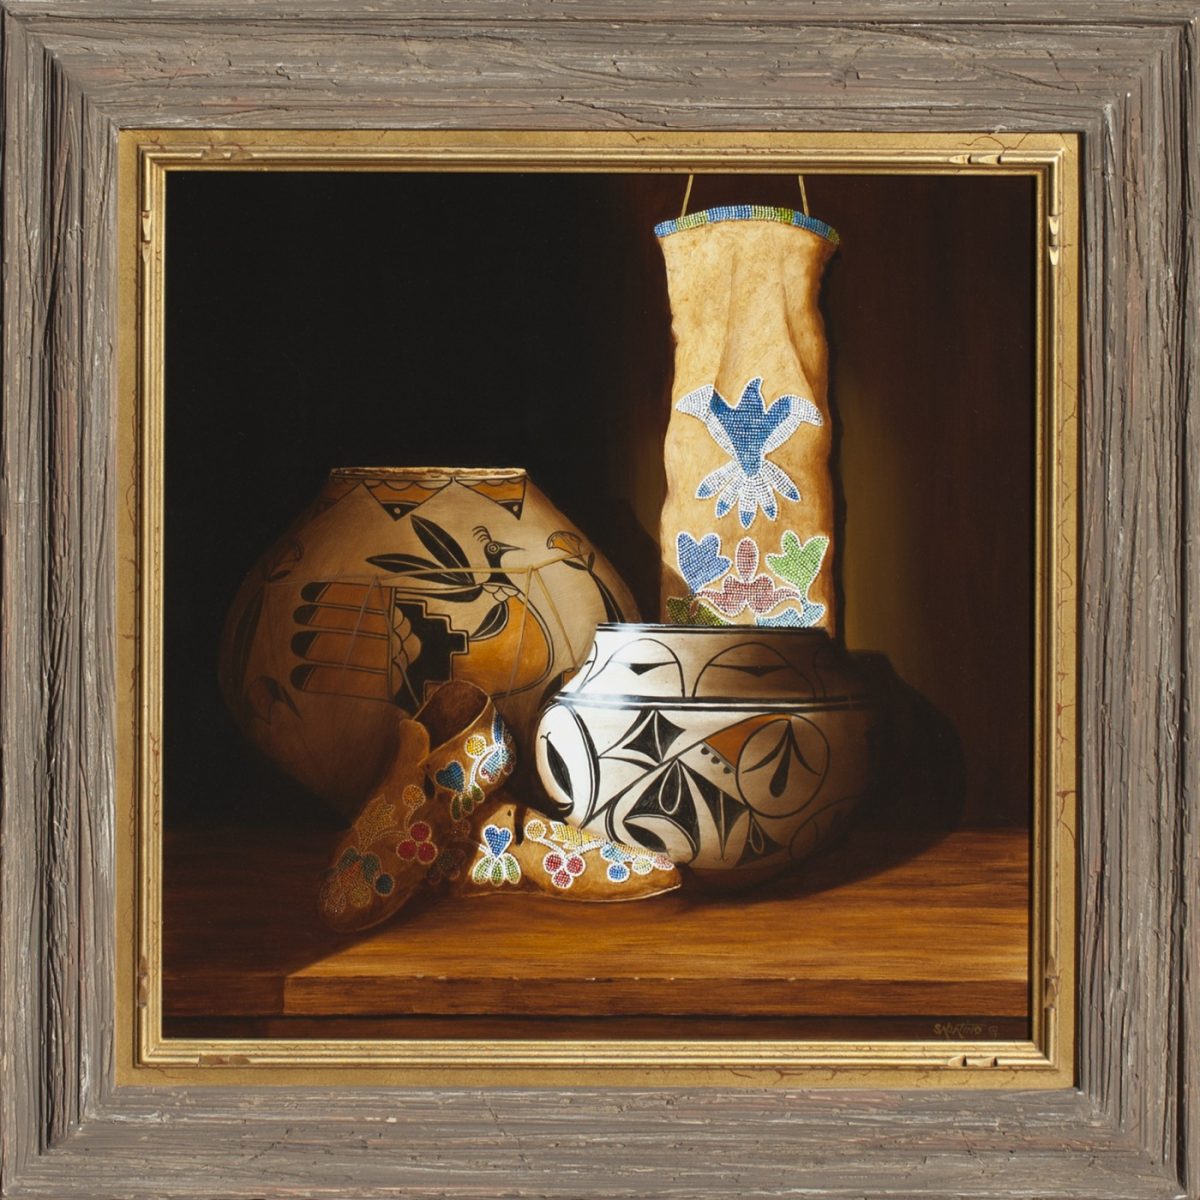 Oil painting of old photograph, tobacco bag and native american pottery by Chuck Sabatino